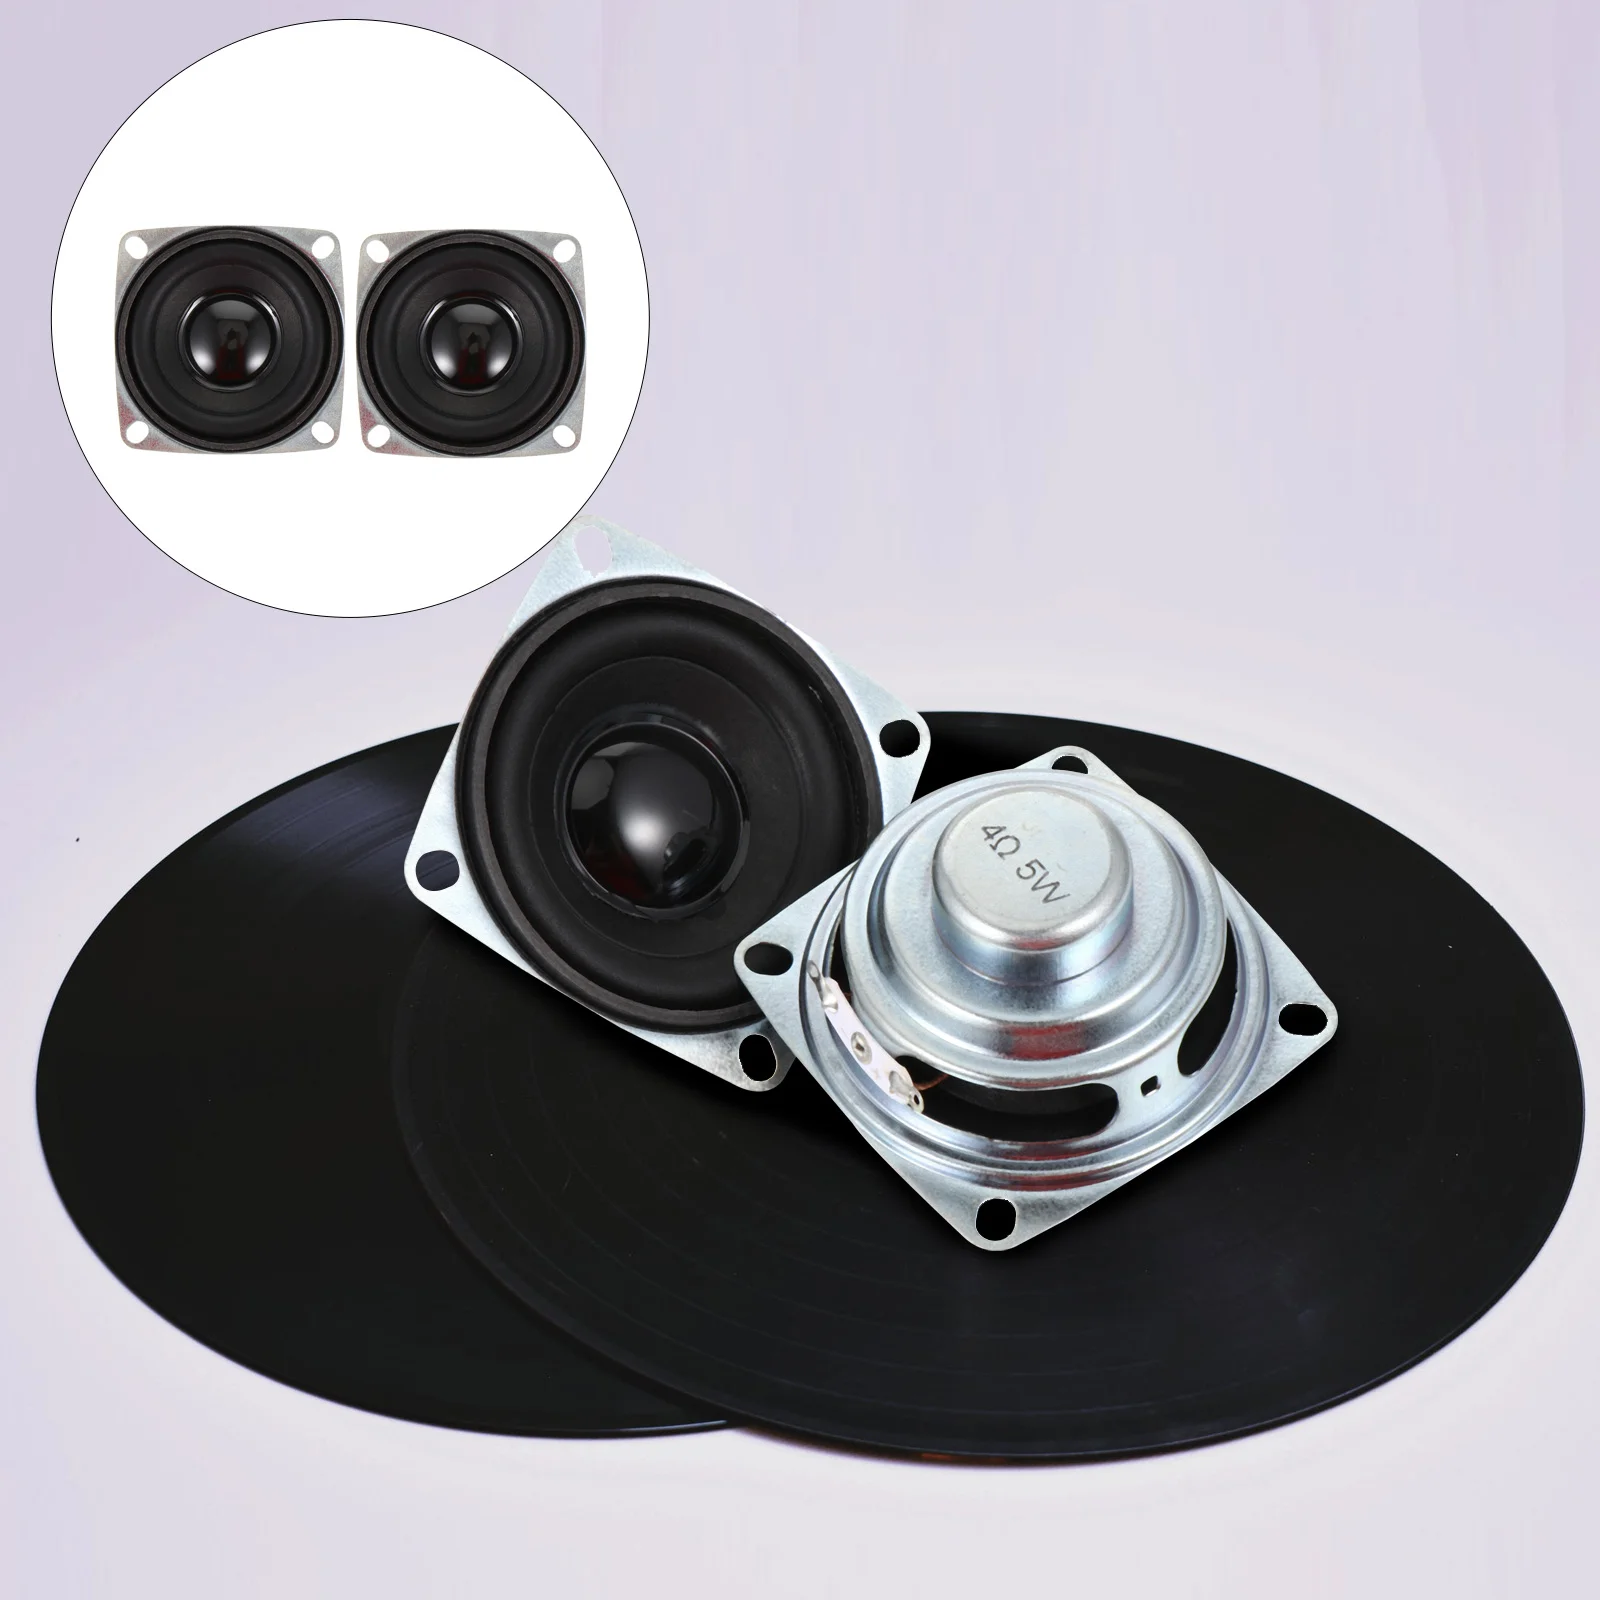 

Speaker Speakers Diy Loudspeaker Magnetic Audio Bass Mini Electronic Loud Subwoofer System Woofer Coaxial Round Mount Wall